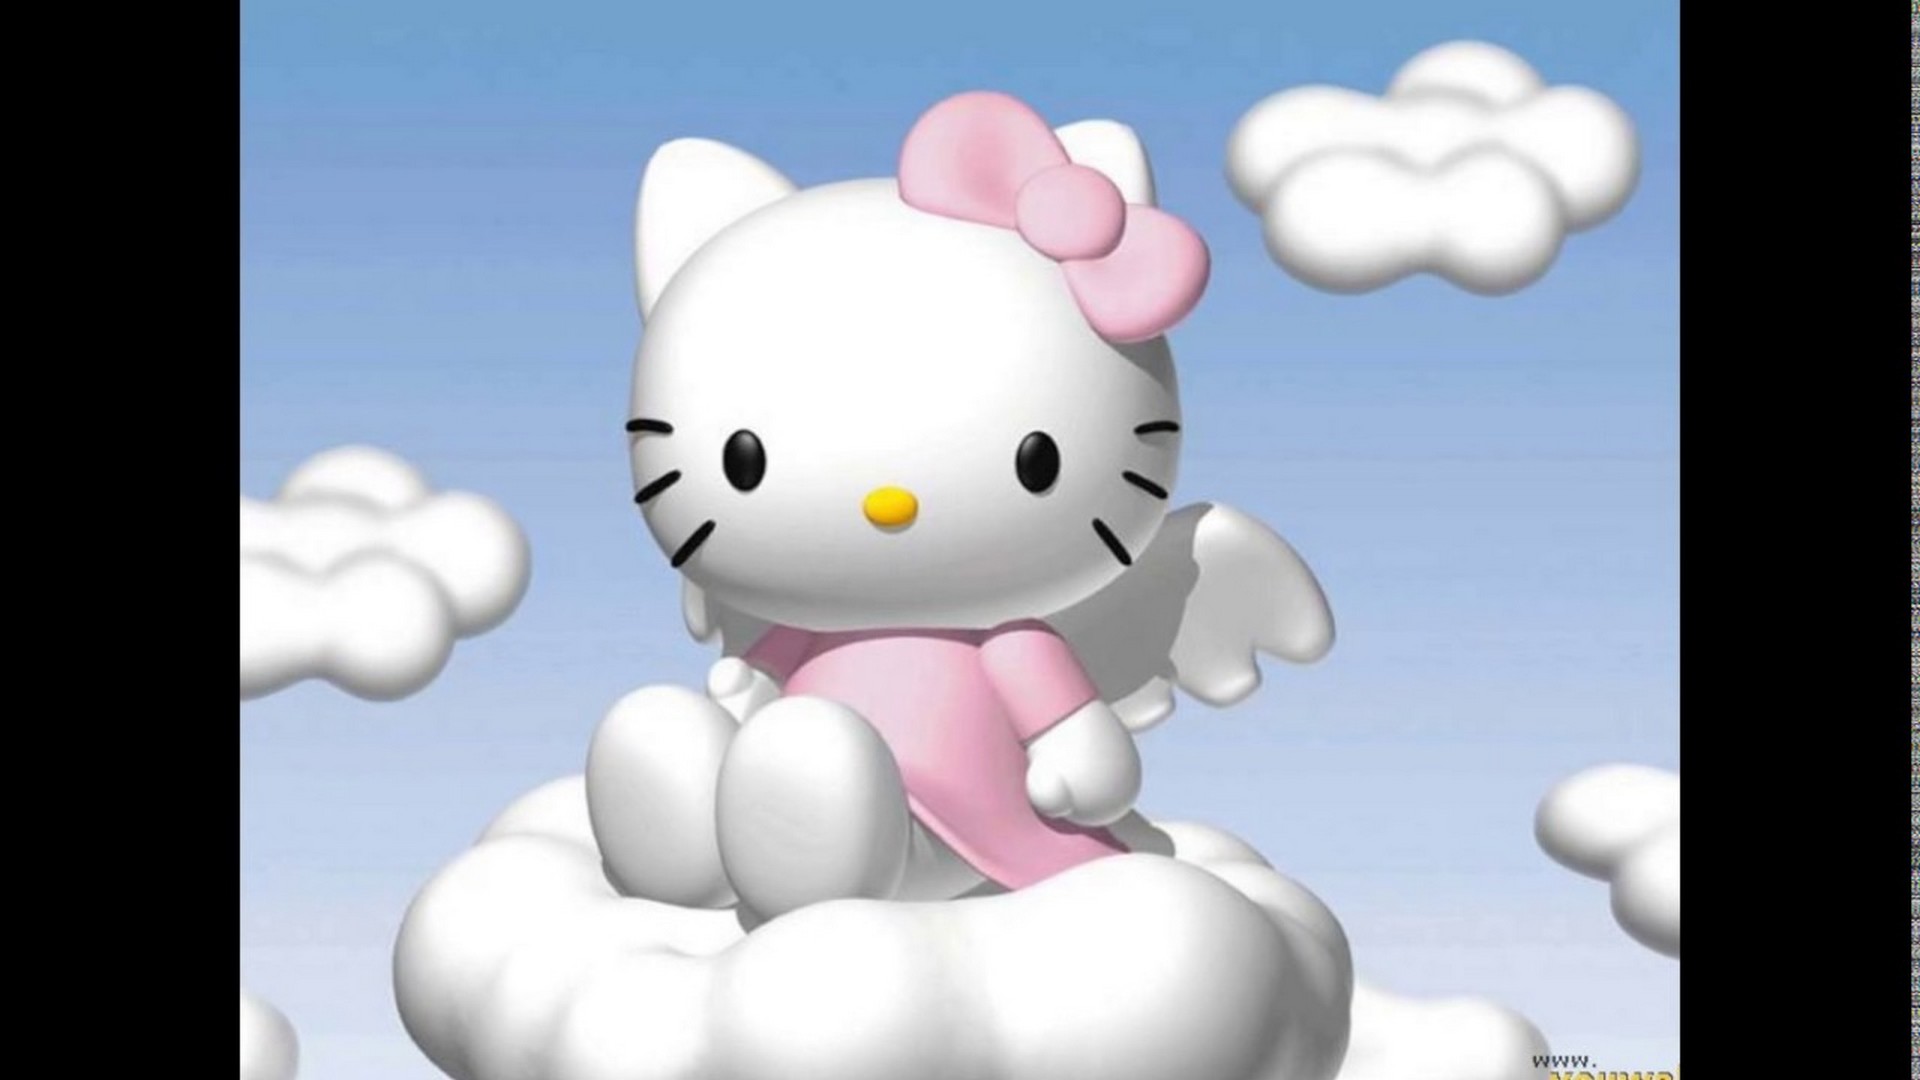 Sanrio Hello Kitty Wallpaper with resolution 1920X1080 pixel. You can use this wallpaper as background for your desktop Computer Screensavers, Android or iPhone smartphones